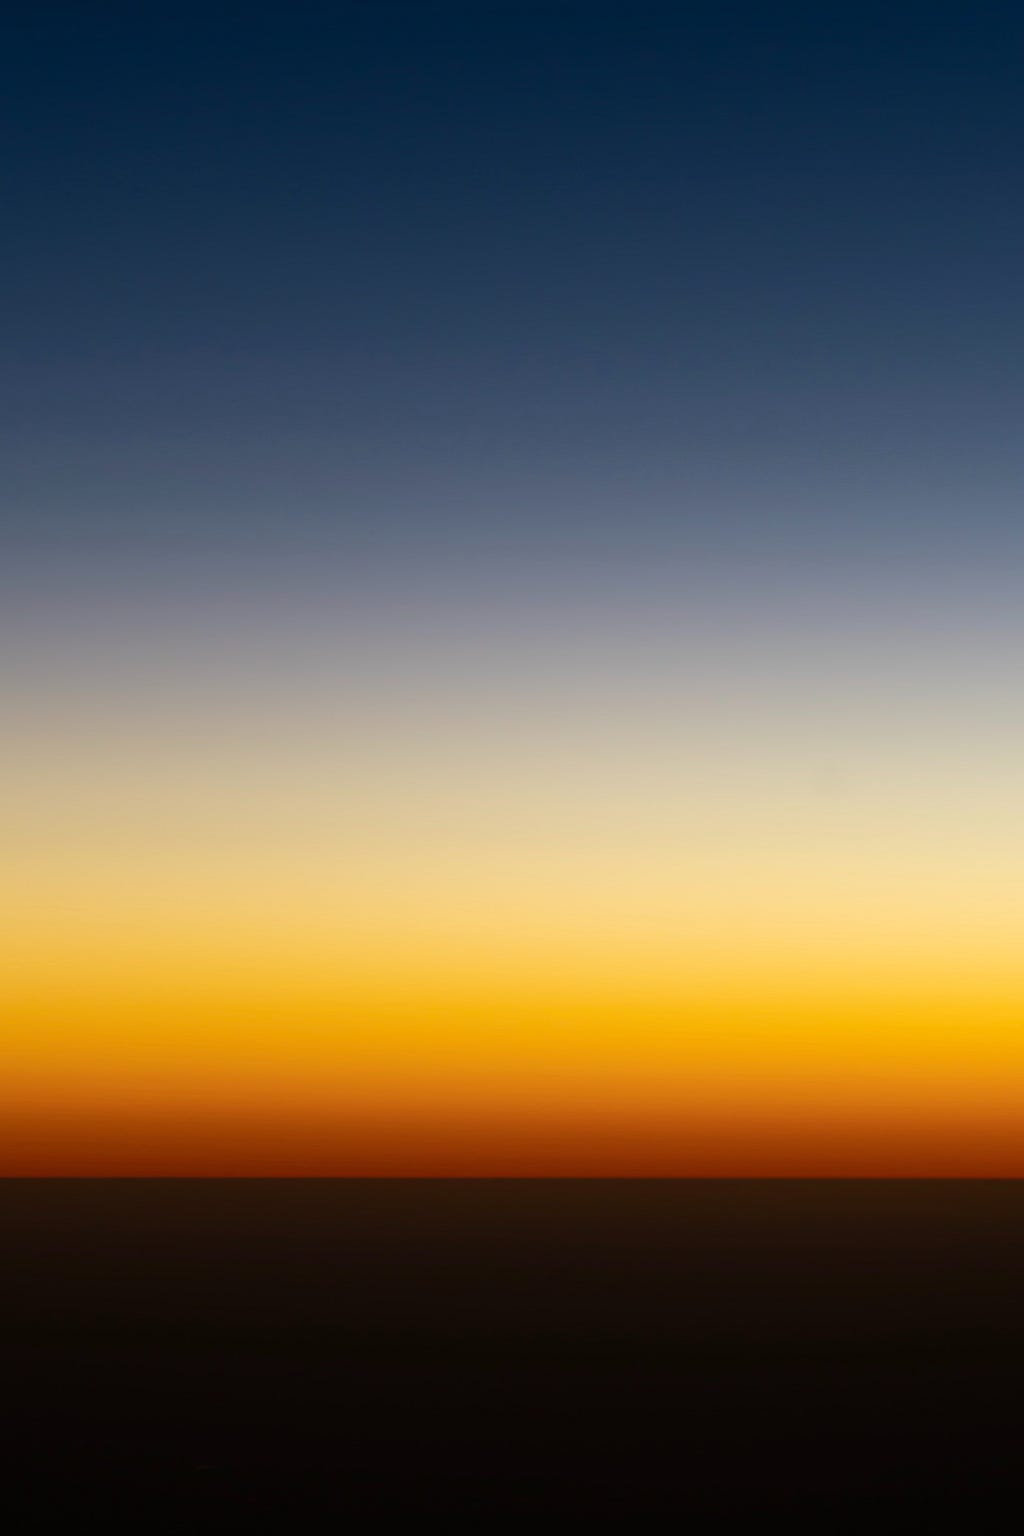 a gradient color change starting at the top with light blue, then yellow, as if to mimic the sky, finally landing on a dark brown